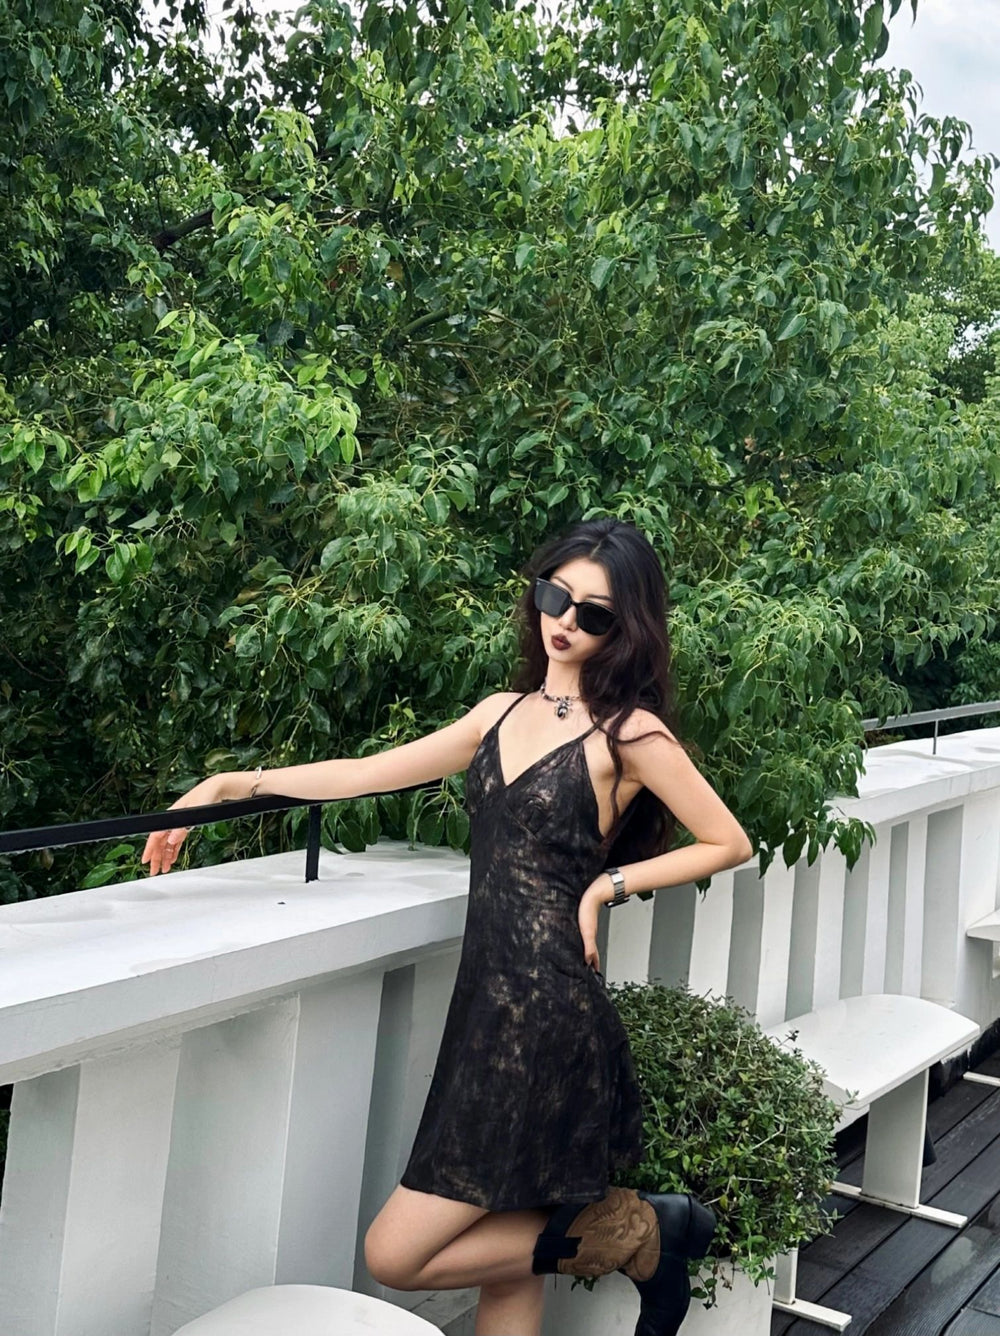 Radiating sophistication, a woman donning a chic black dress and trendy sunglasses strikes a pose on a sun-kissed deck.